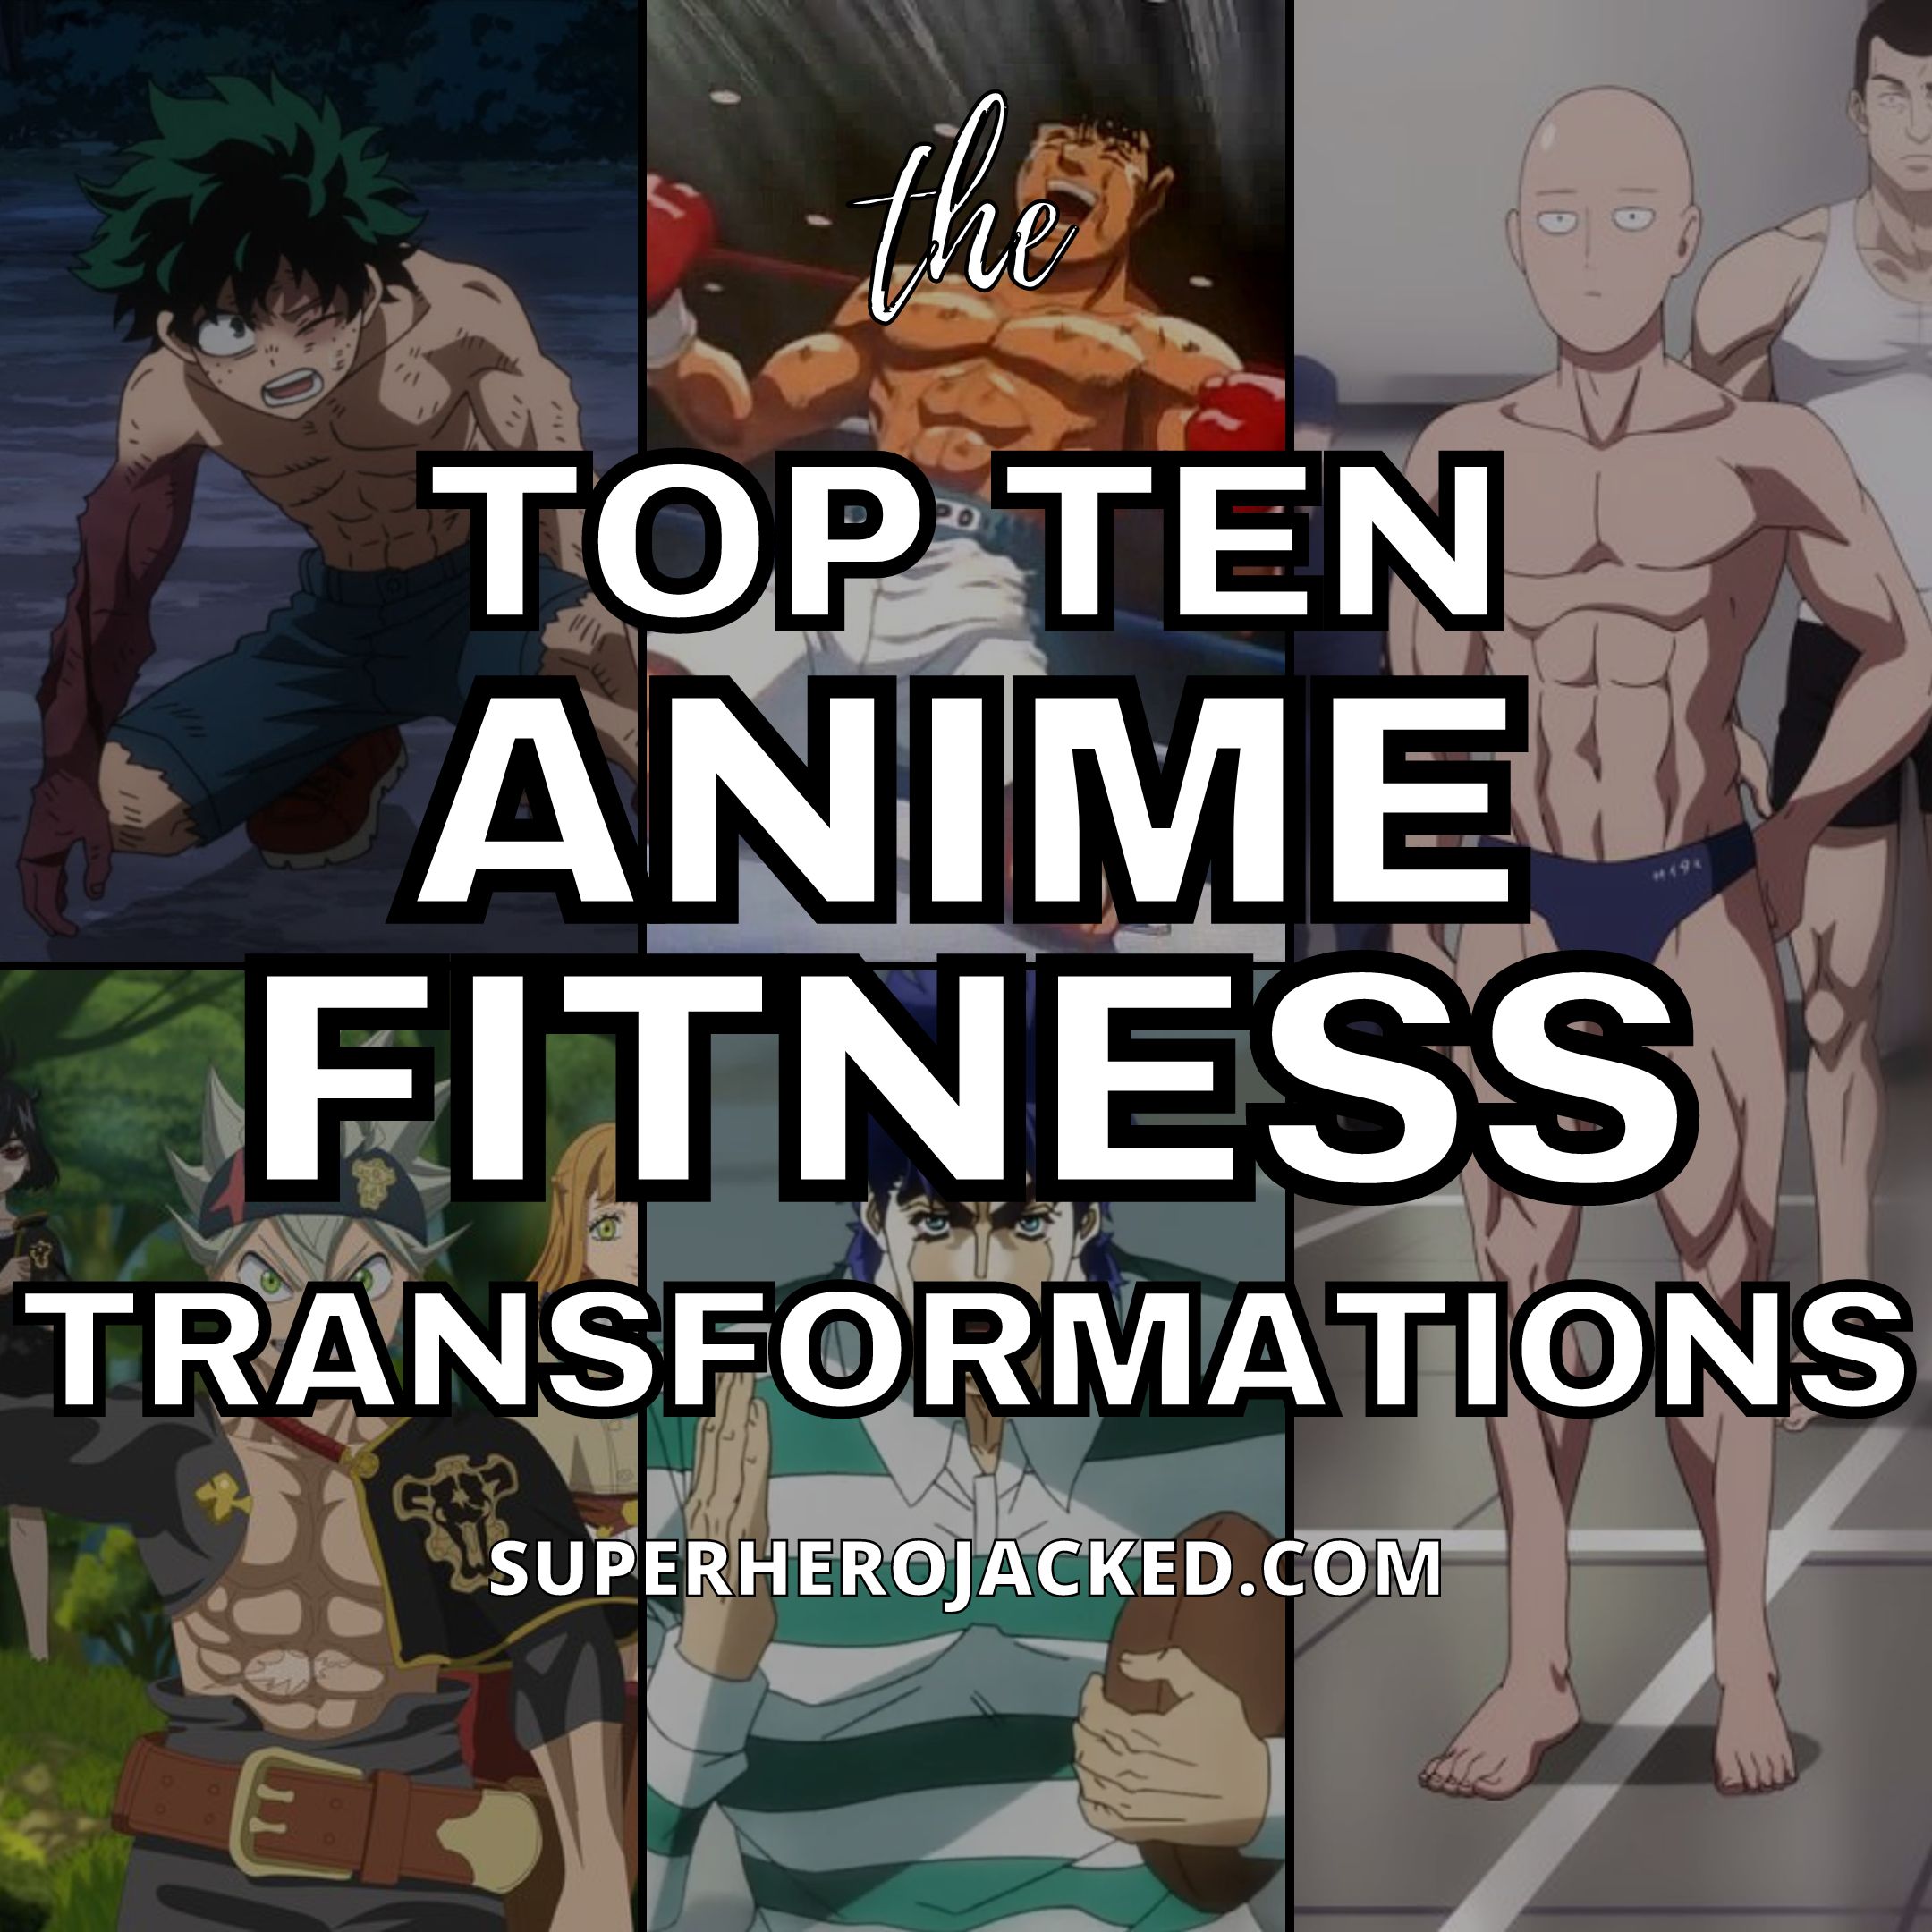 The best anime gym clothes x gear new lifting belt sale active most  aesthetic anime gym brand in the  Link in bio  Instagram